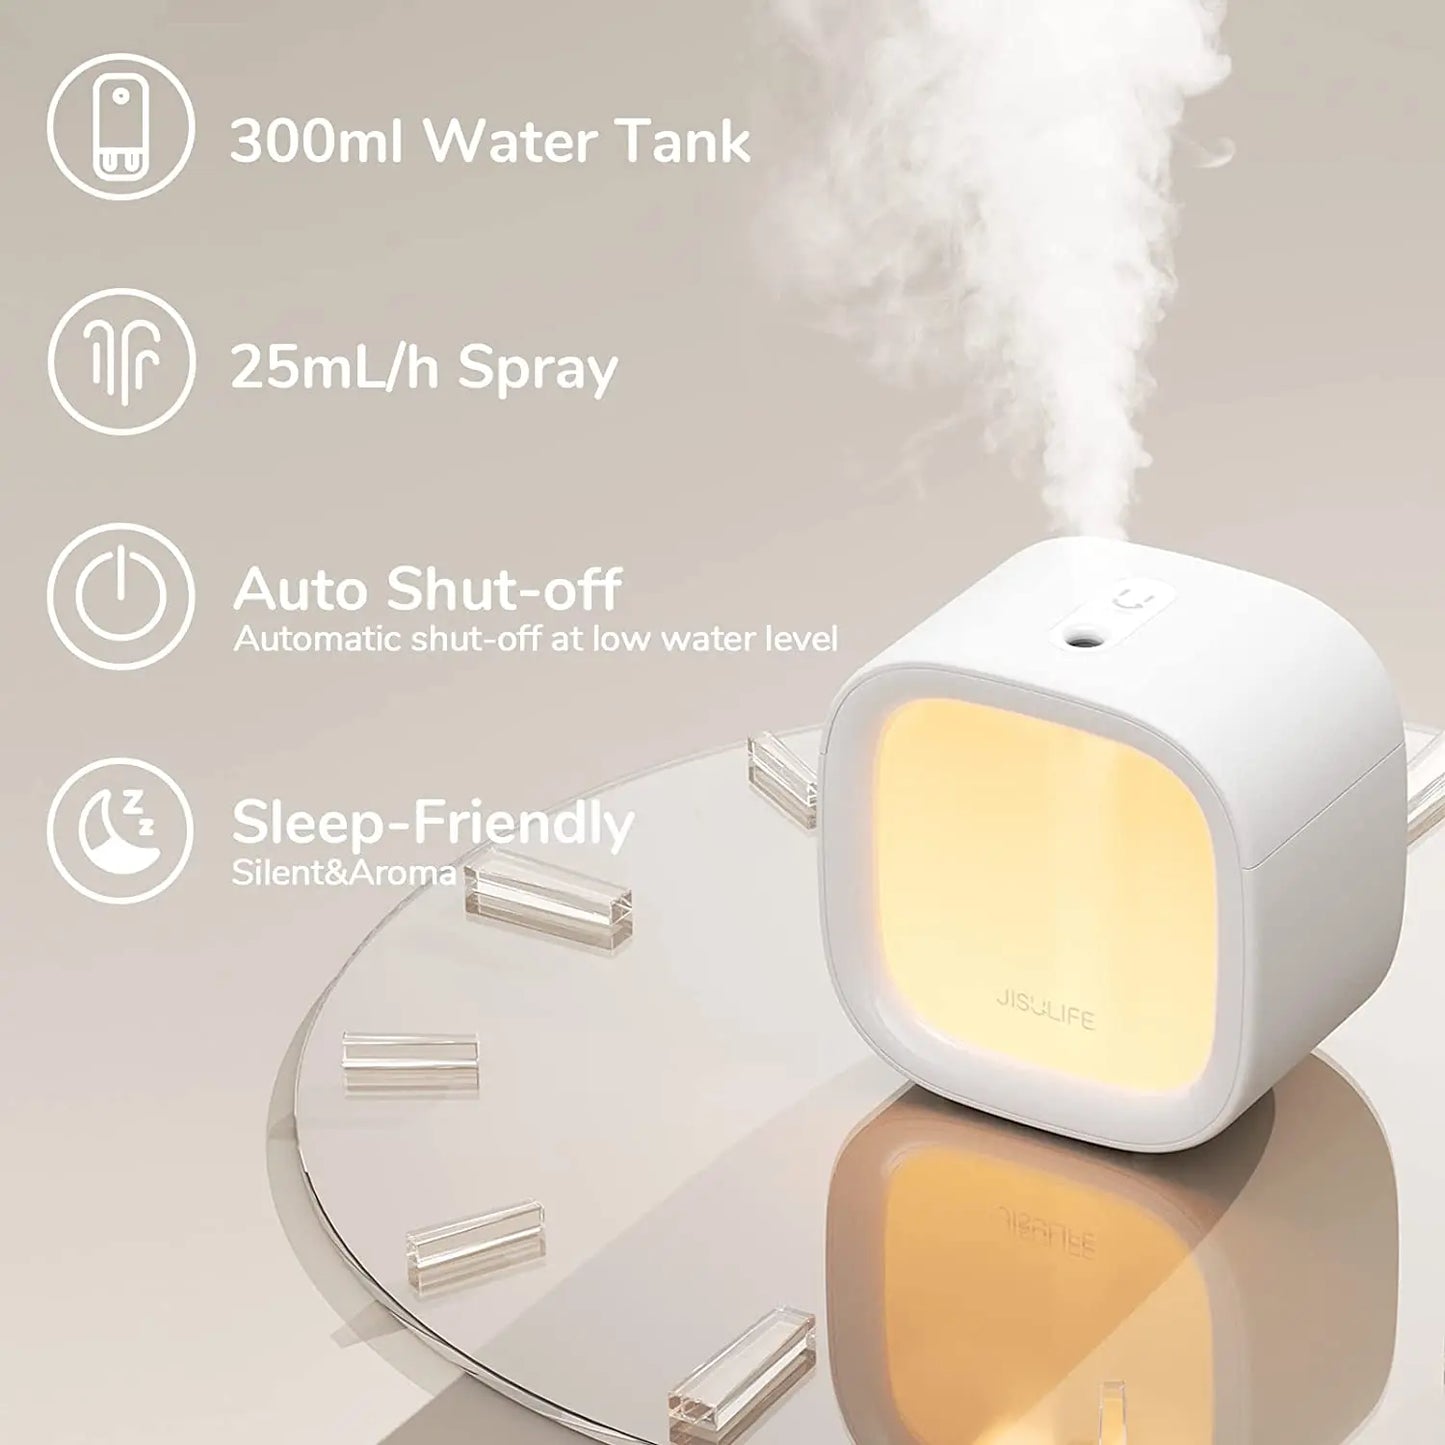 JISULIFE Portable Mini Humidifier Rechargeable Night Light Aromatherapy diffuser Mist Small Car Humidifier Quiet Desk Humidifier